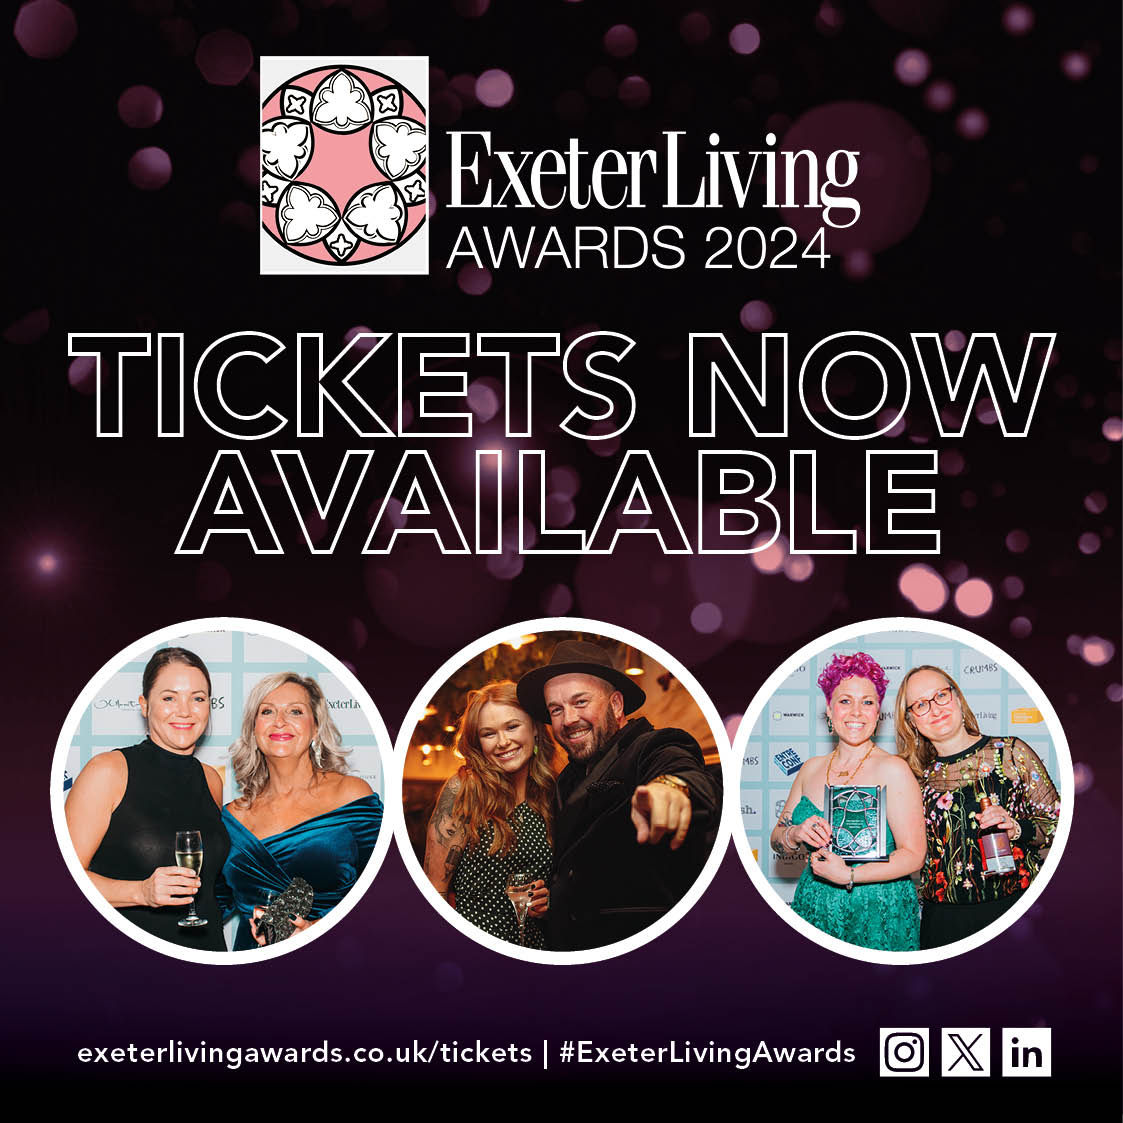 ⭐️ Tickets and Tables for the 2024 Exeter Living Awards are available now! Beat the rush and secure your attendance here: exeterlivingawards.co.uk/tickets/ #ExeterLivingAwards2024